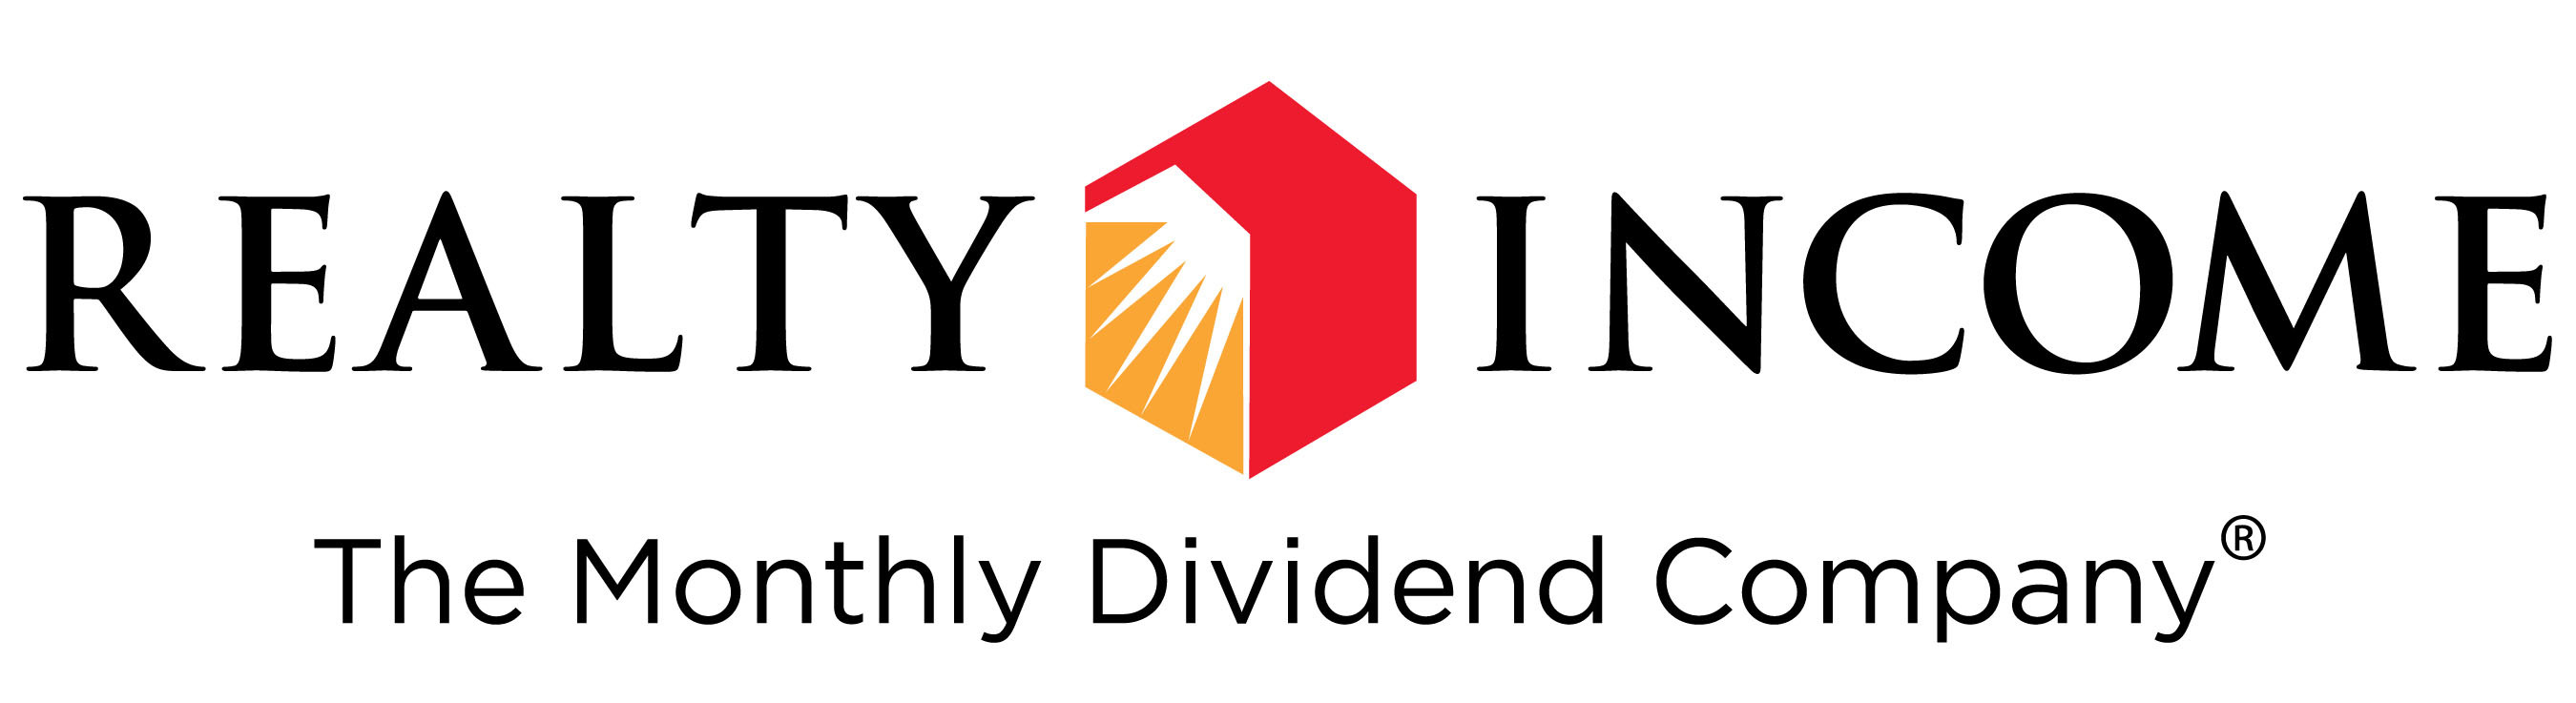 Realty Income Corporation - The Monthly Dividend Company.